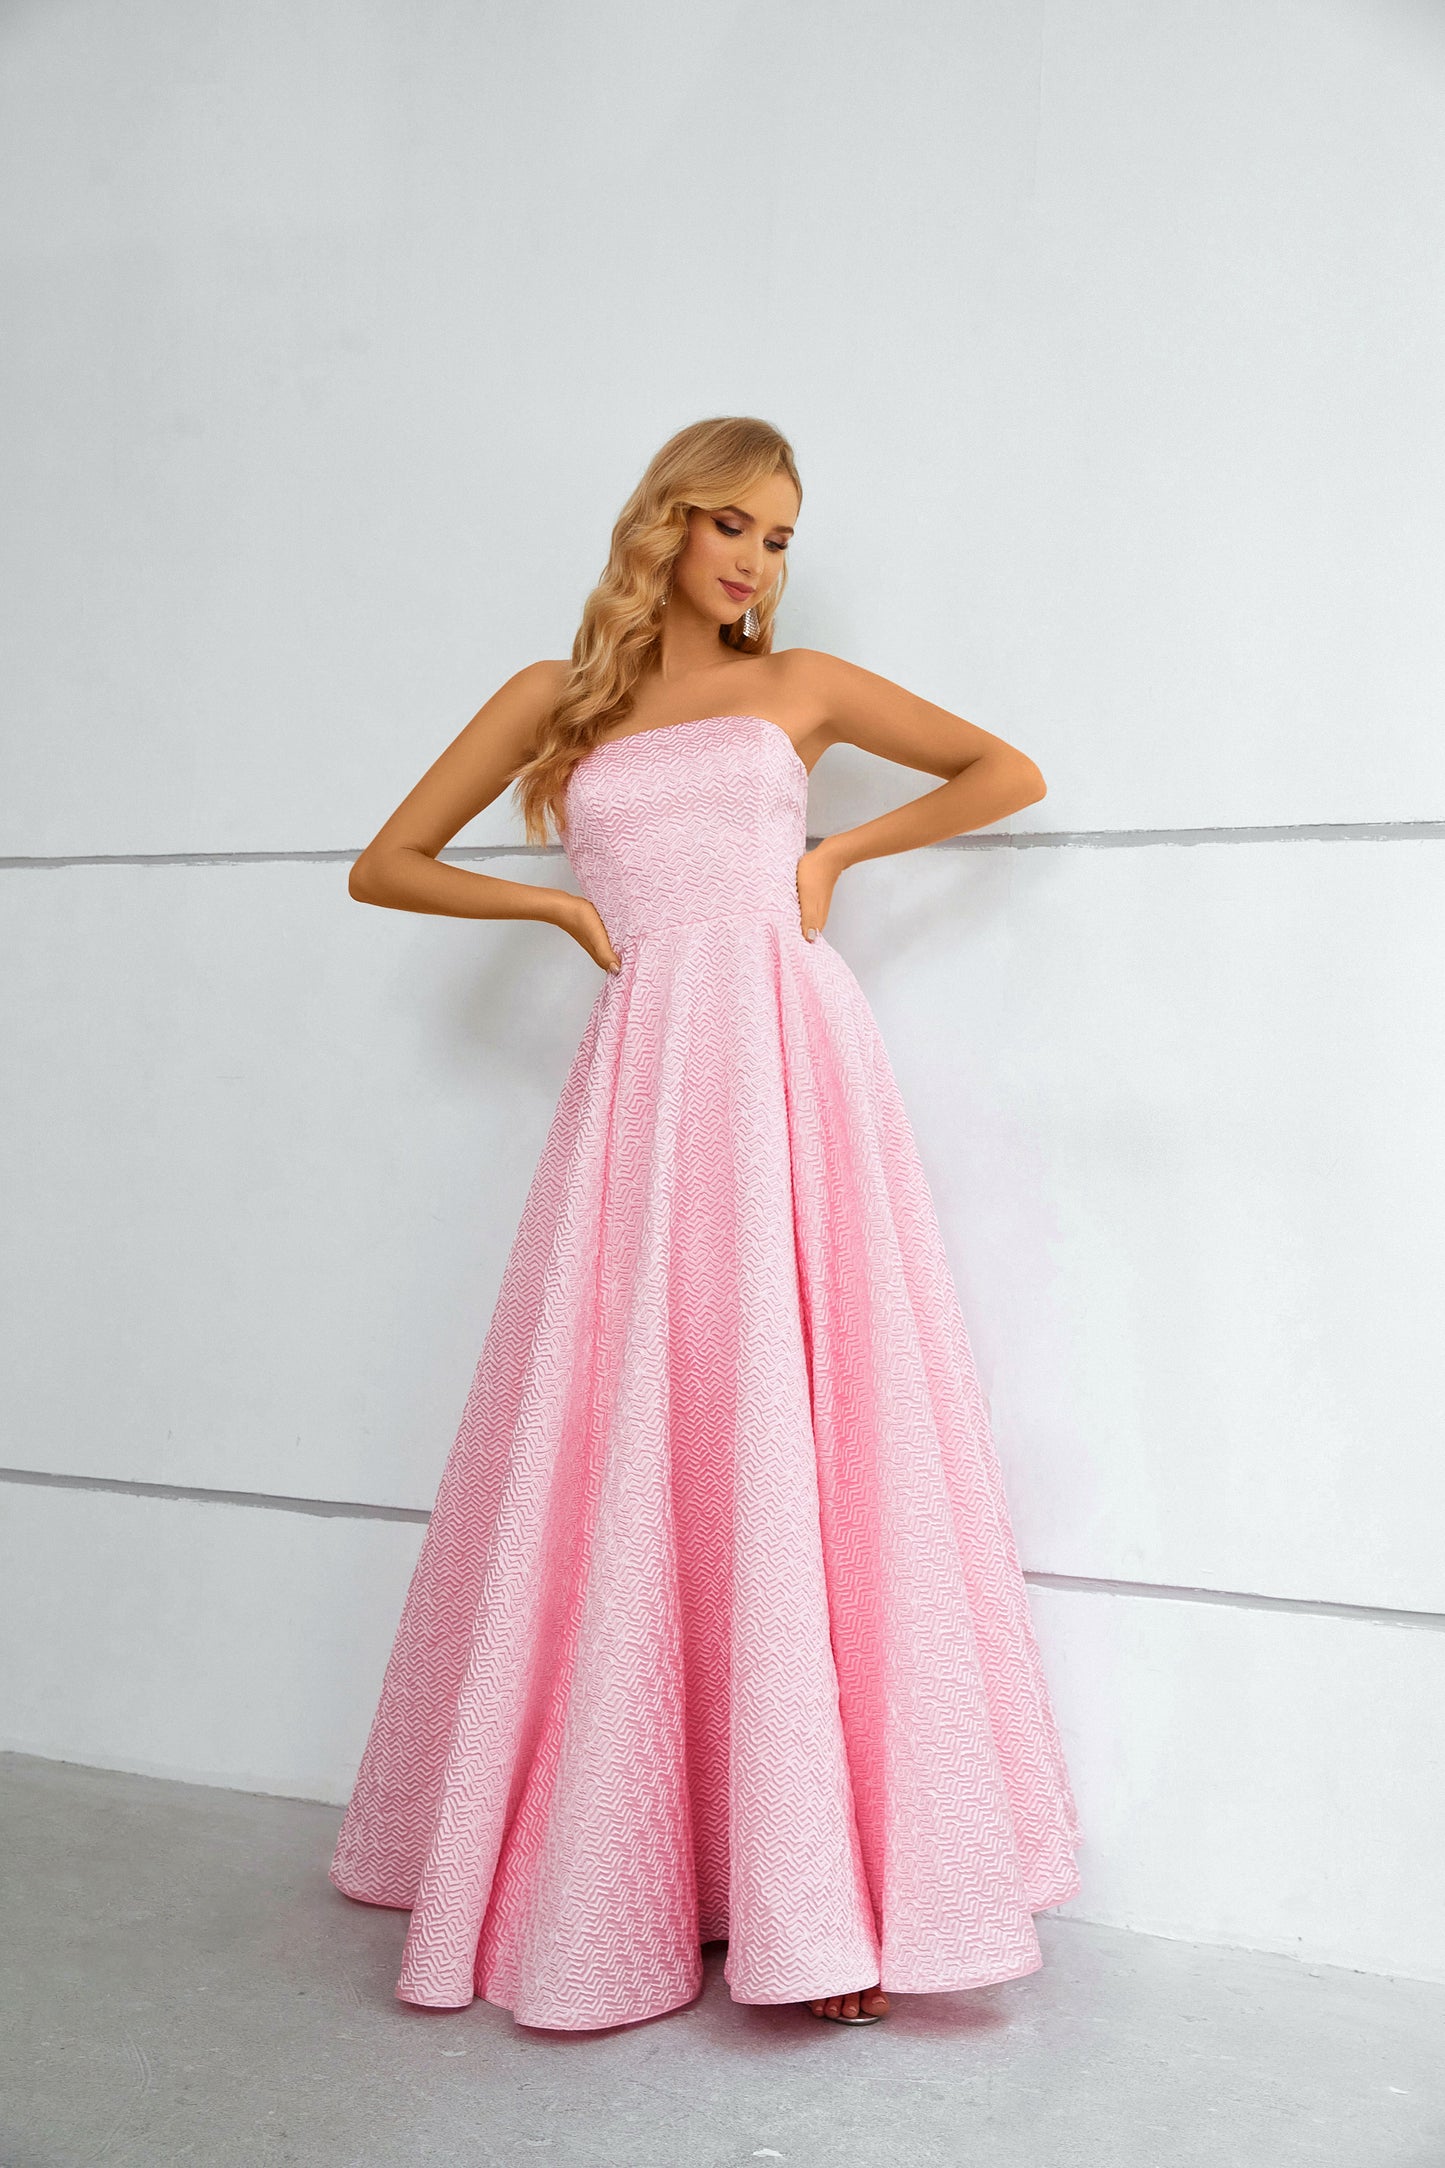 Elegant Pink Strapless A-Line Lace Up Prom Dresses